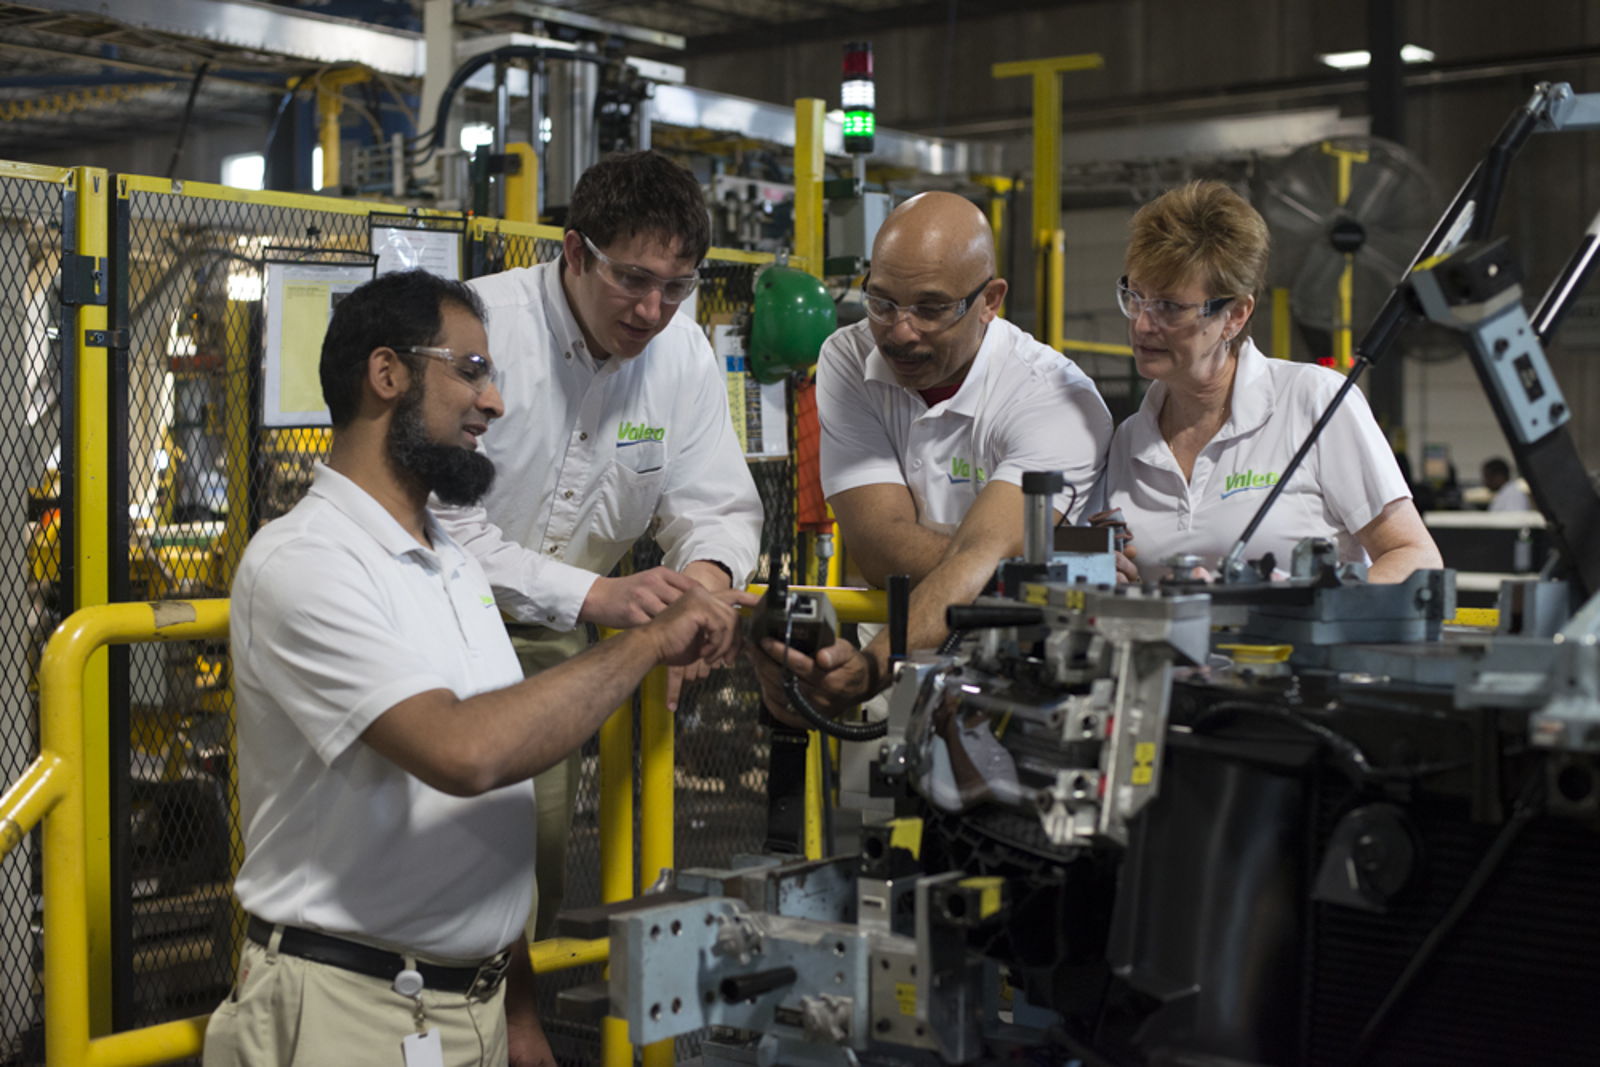 A group of employees inspecting a product at Auburn Hills USA plant